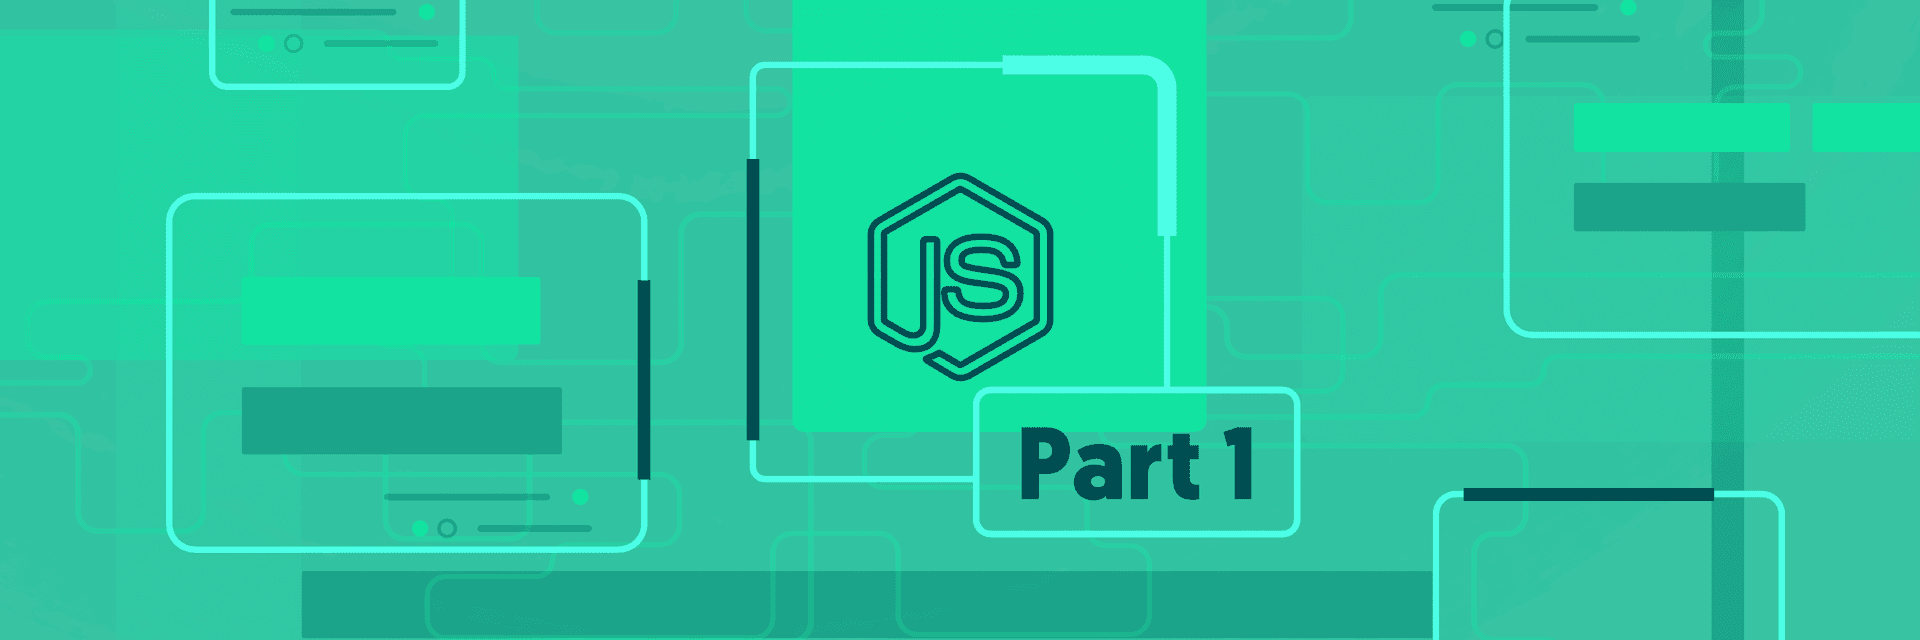 Creating an Identity Service with Node.js Part 1